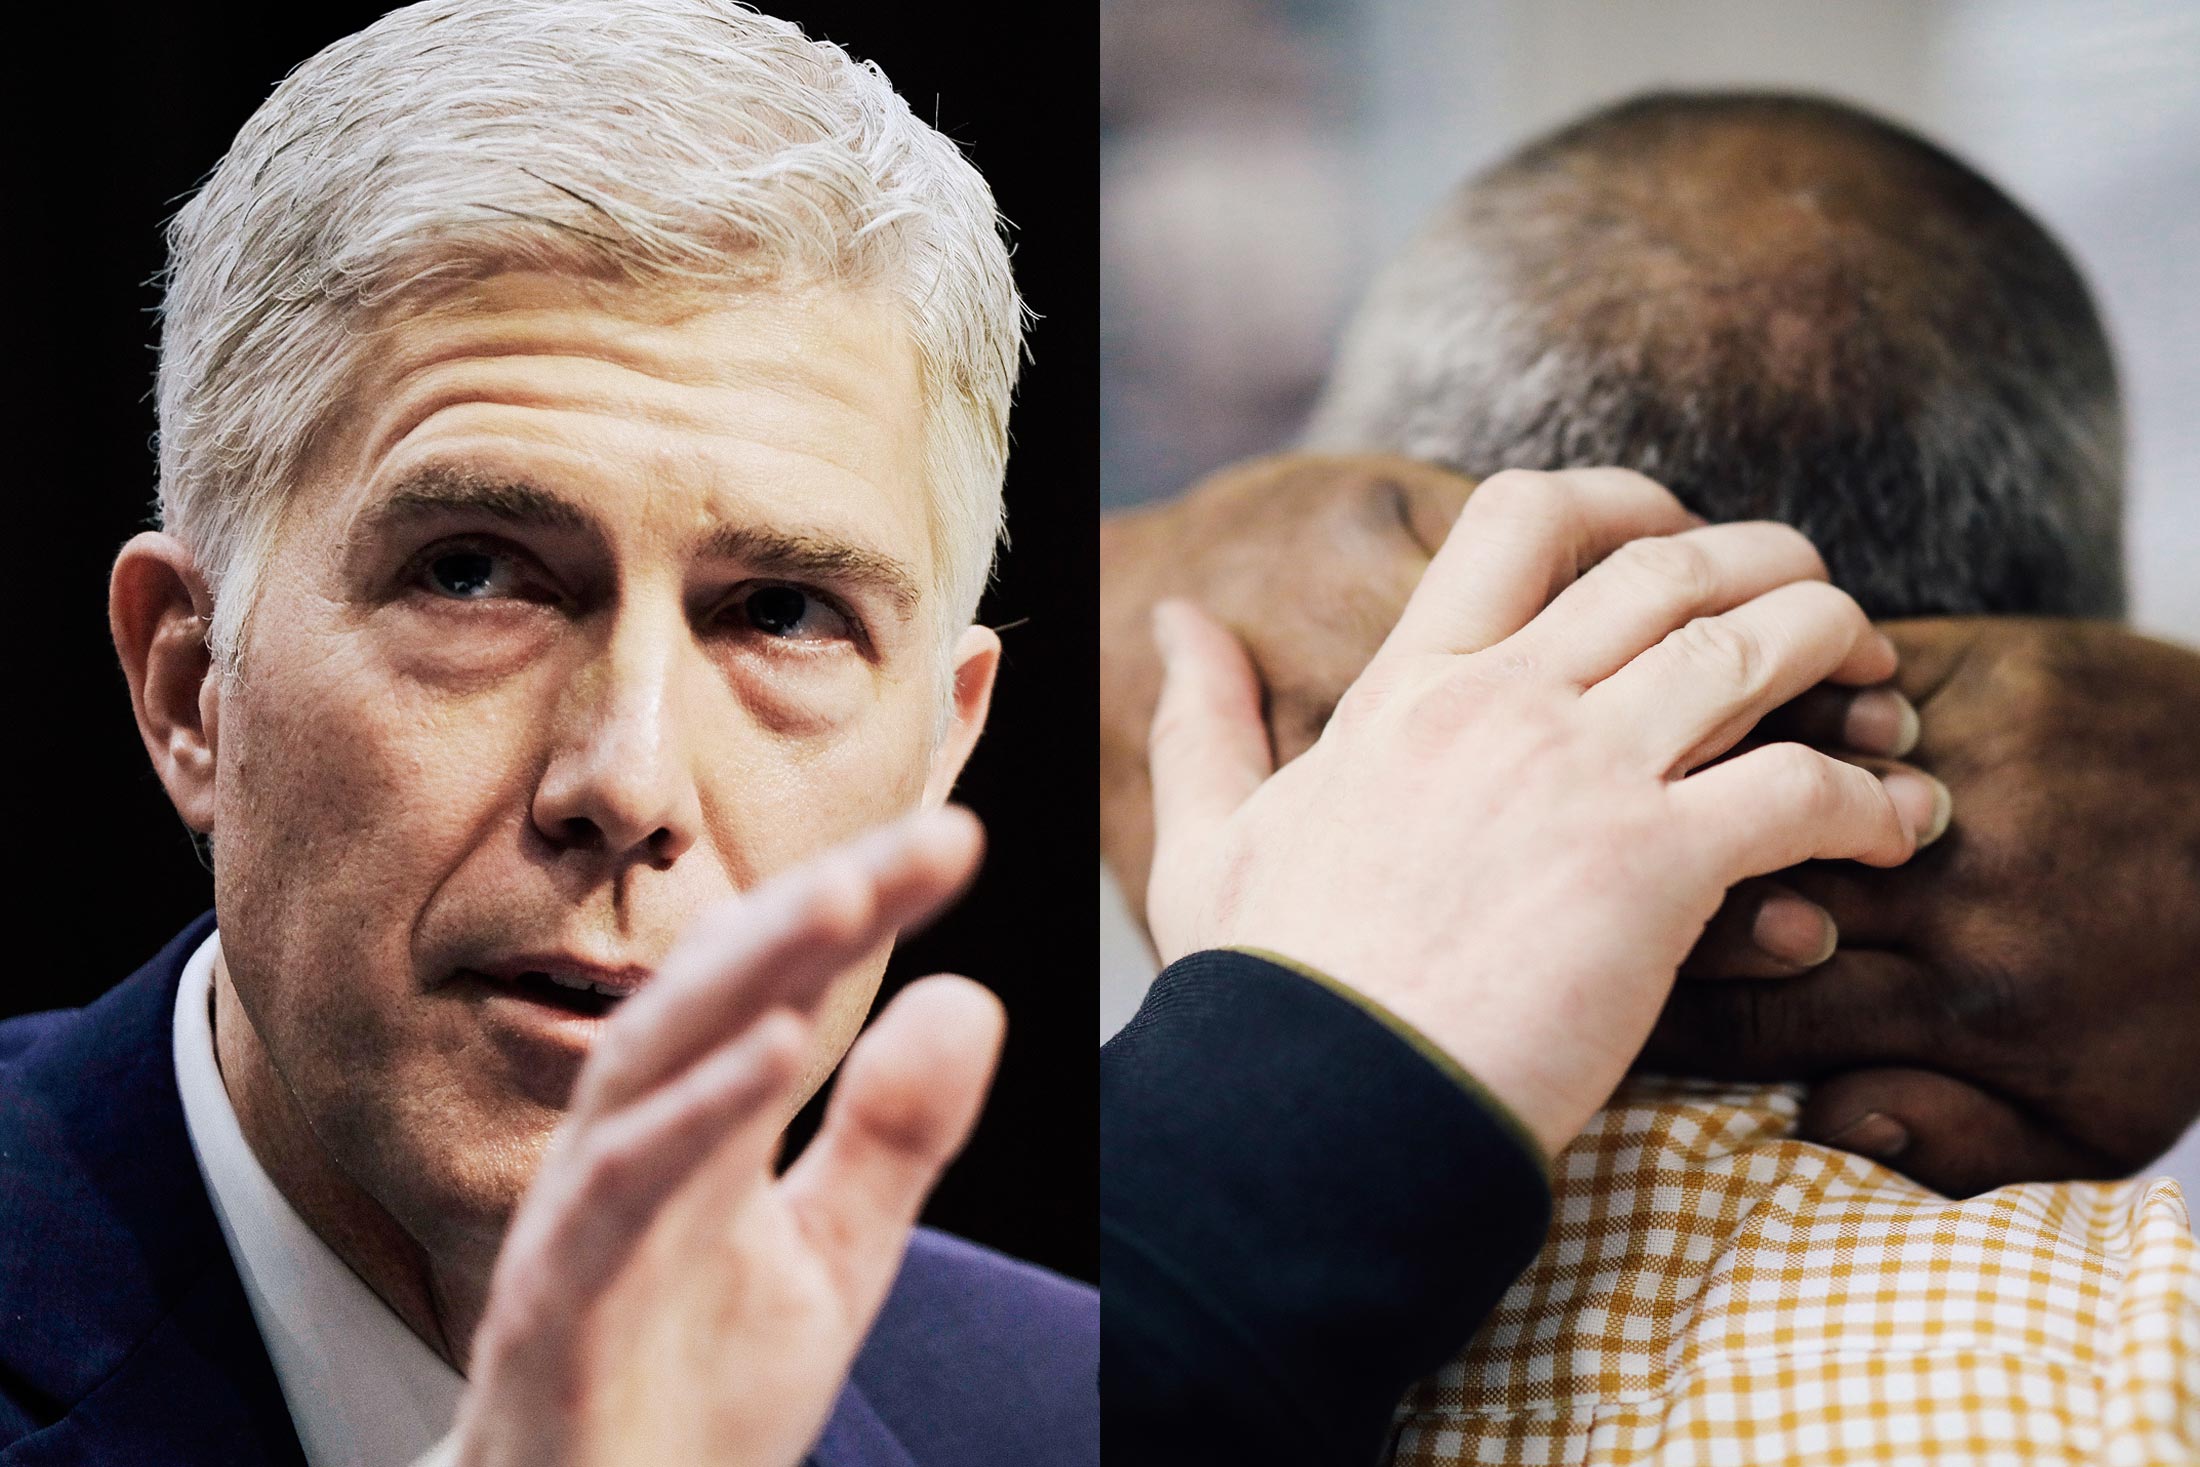 Left: Then–U.S. Supreme Court nominee Neil Gorsuch at his Senate Judiciary Committee confirmation hearing in March 2017. Right: An Immigration and Customs Enforcement officer frisks an immigrant at a processing center after arresting him on April 11 in New York.